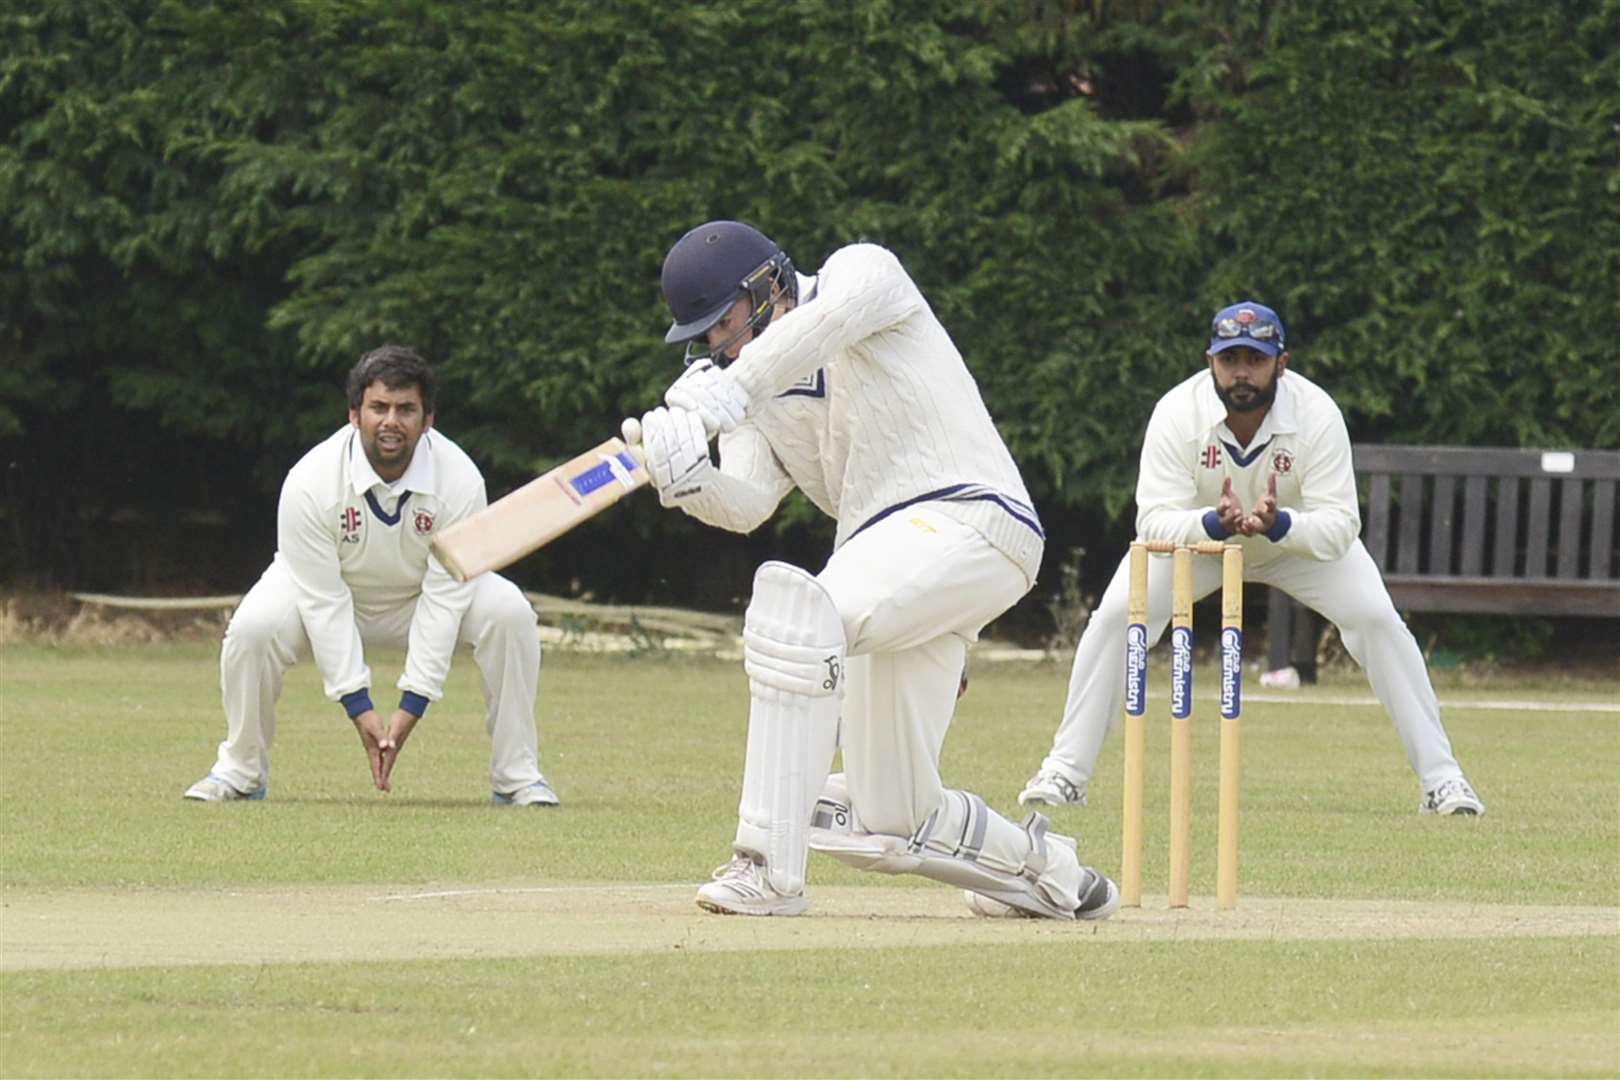 Canterbury's Ben Rutherford looks for runs against Beckenham. Picture: Paul Amos